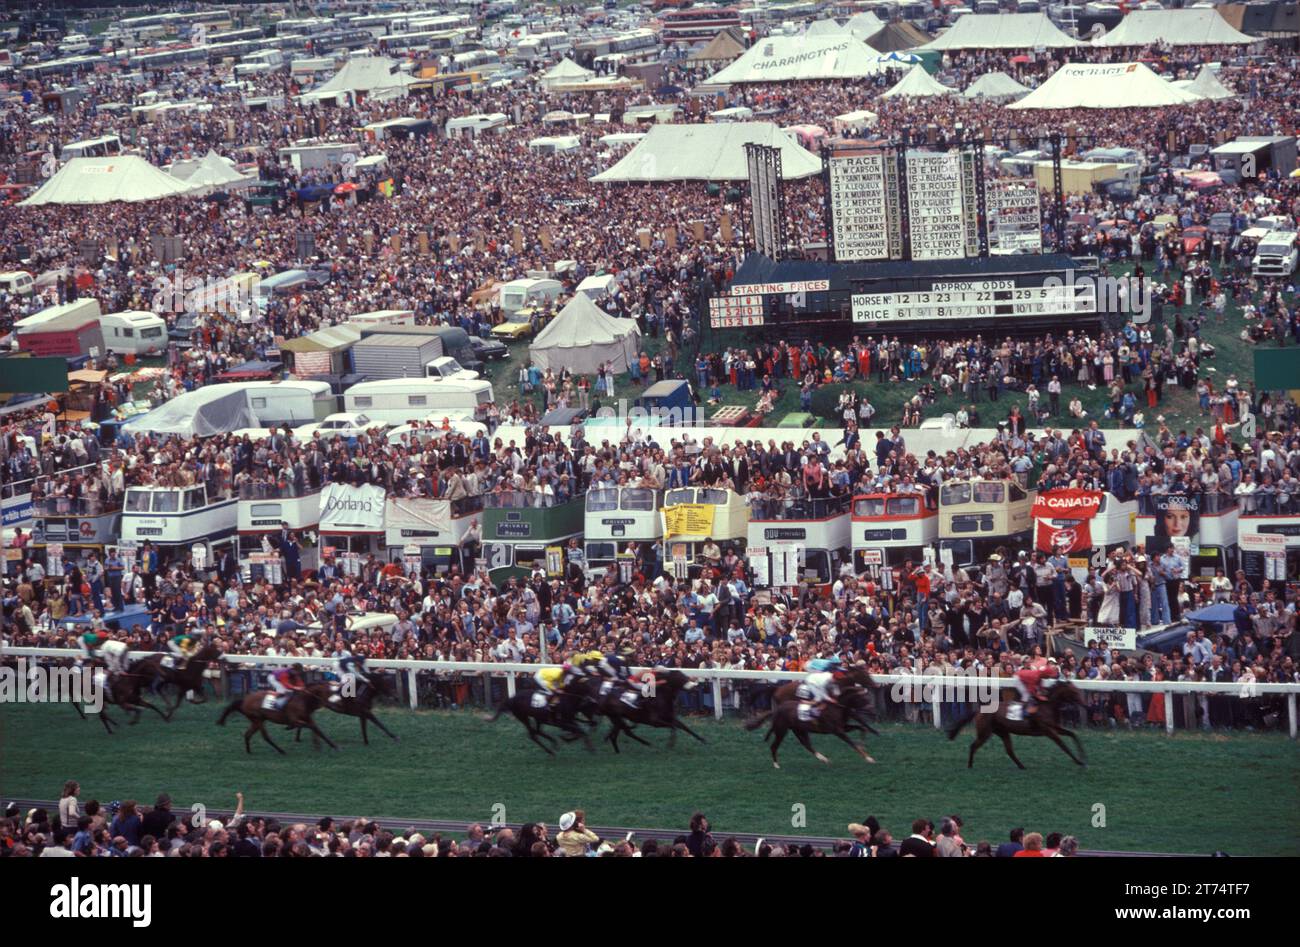 Derby Day, Epsom  Downs, the Derby horse race. The horse coming into finish the crowd of spectators 'On the Hill', on the cheaper not paying stand side of the race track.  Epsom Downs, Surrey, England June 1985 1980s UK HOMER SYKES Stock Photo